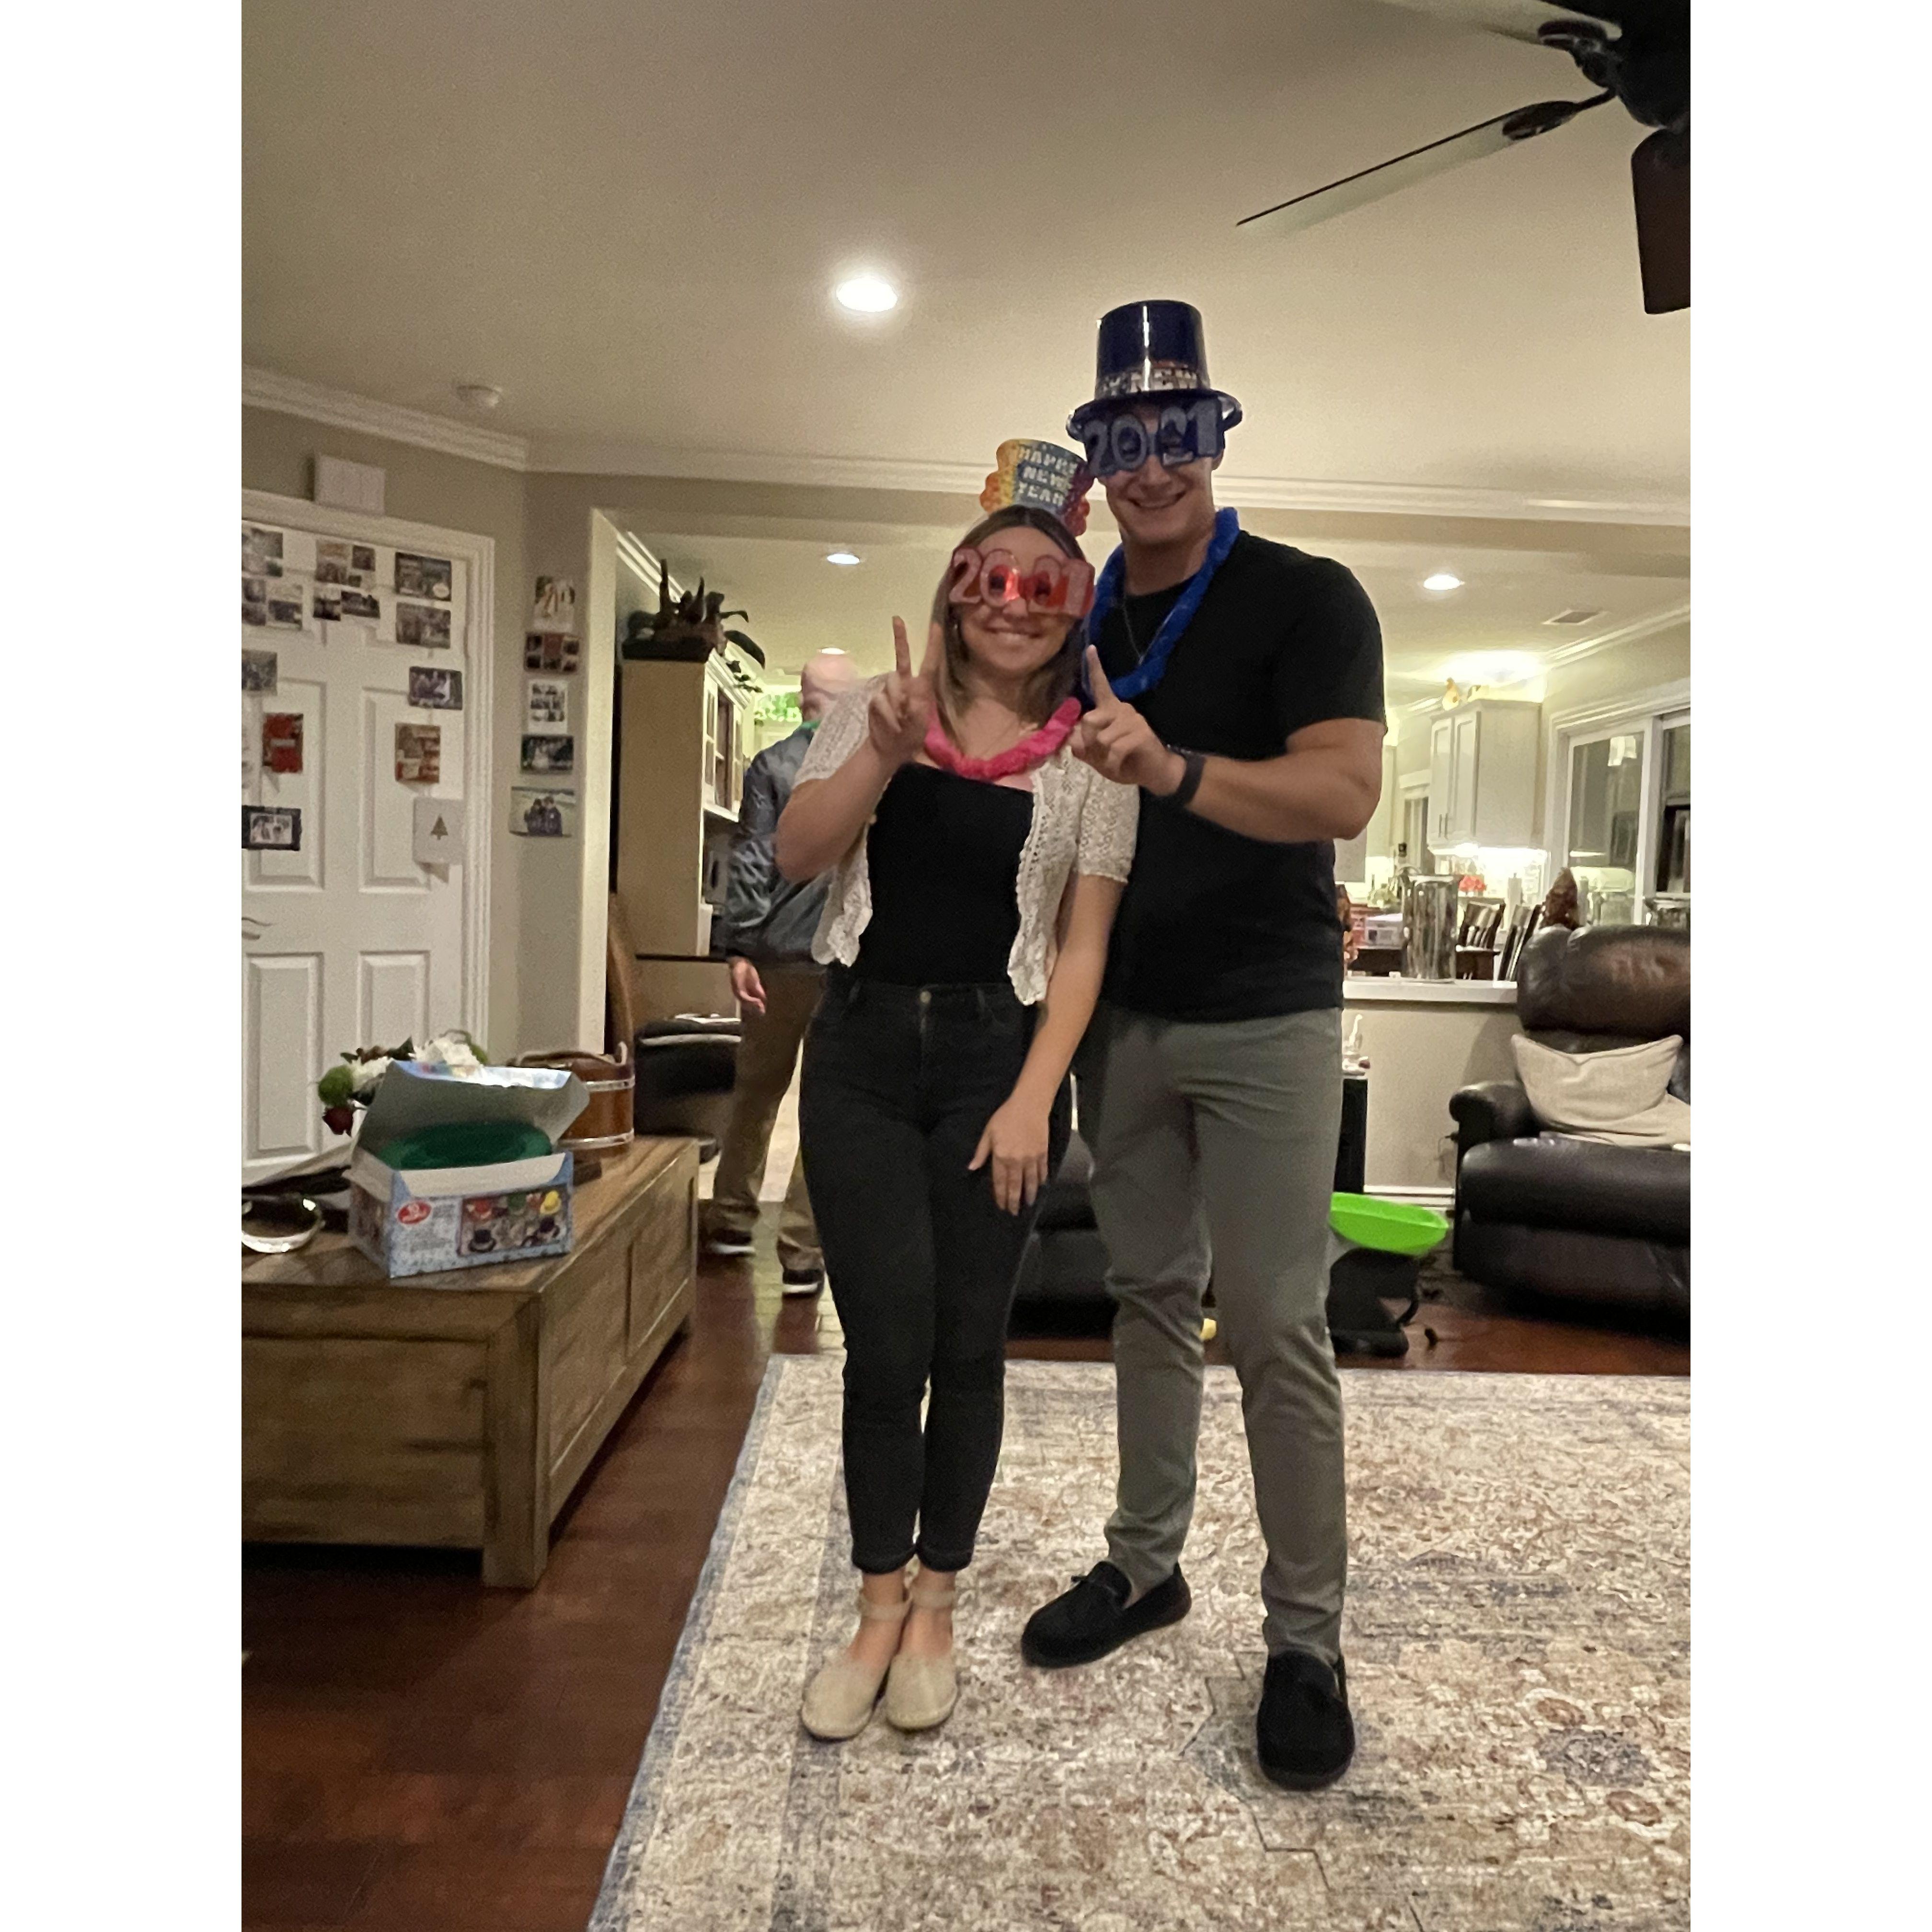 New years together- 2021!